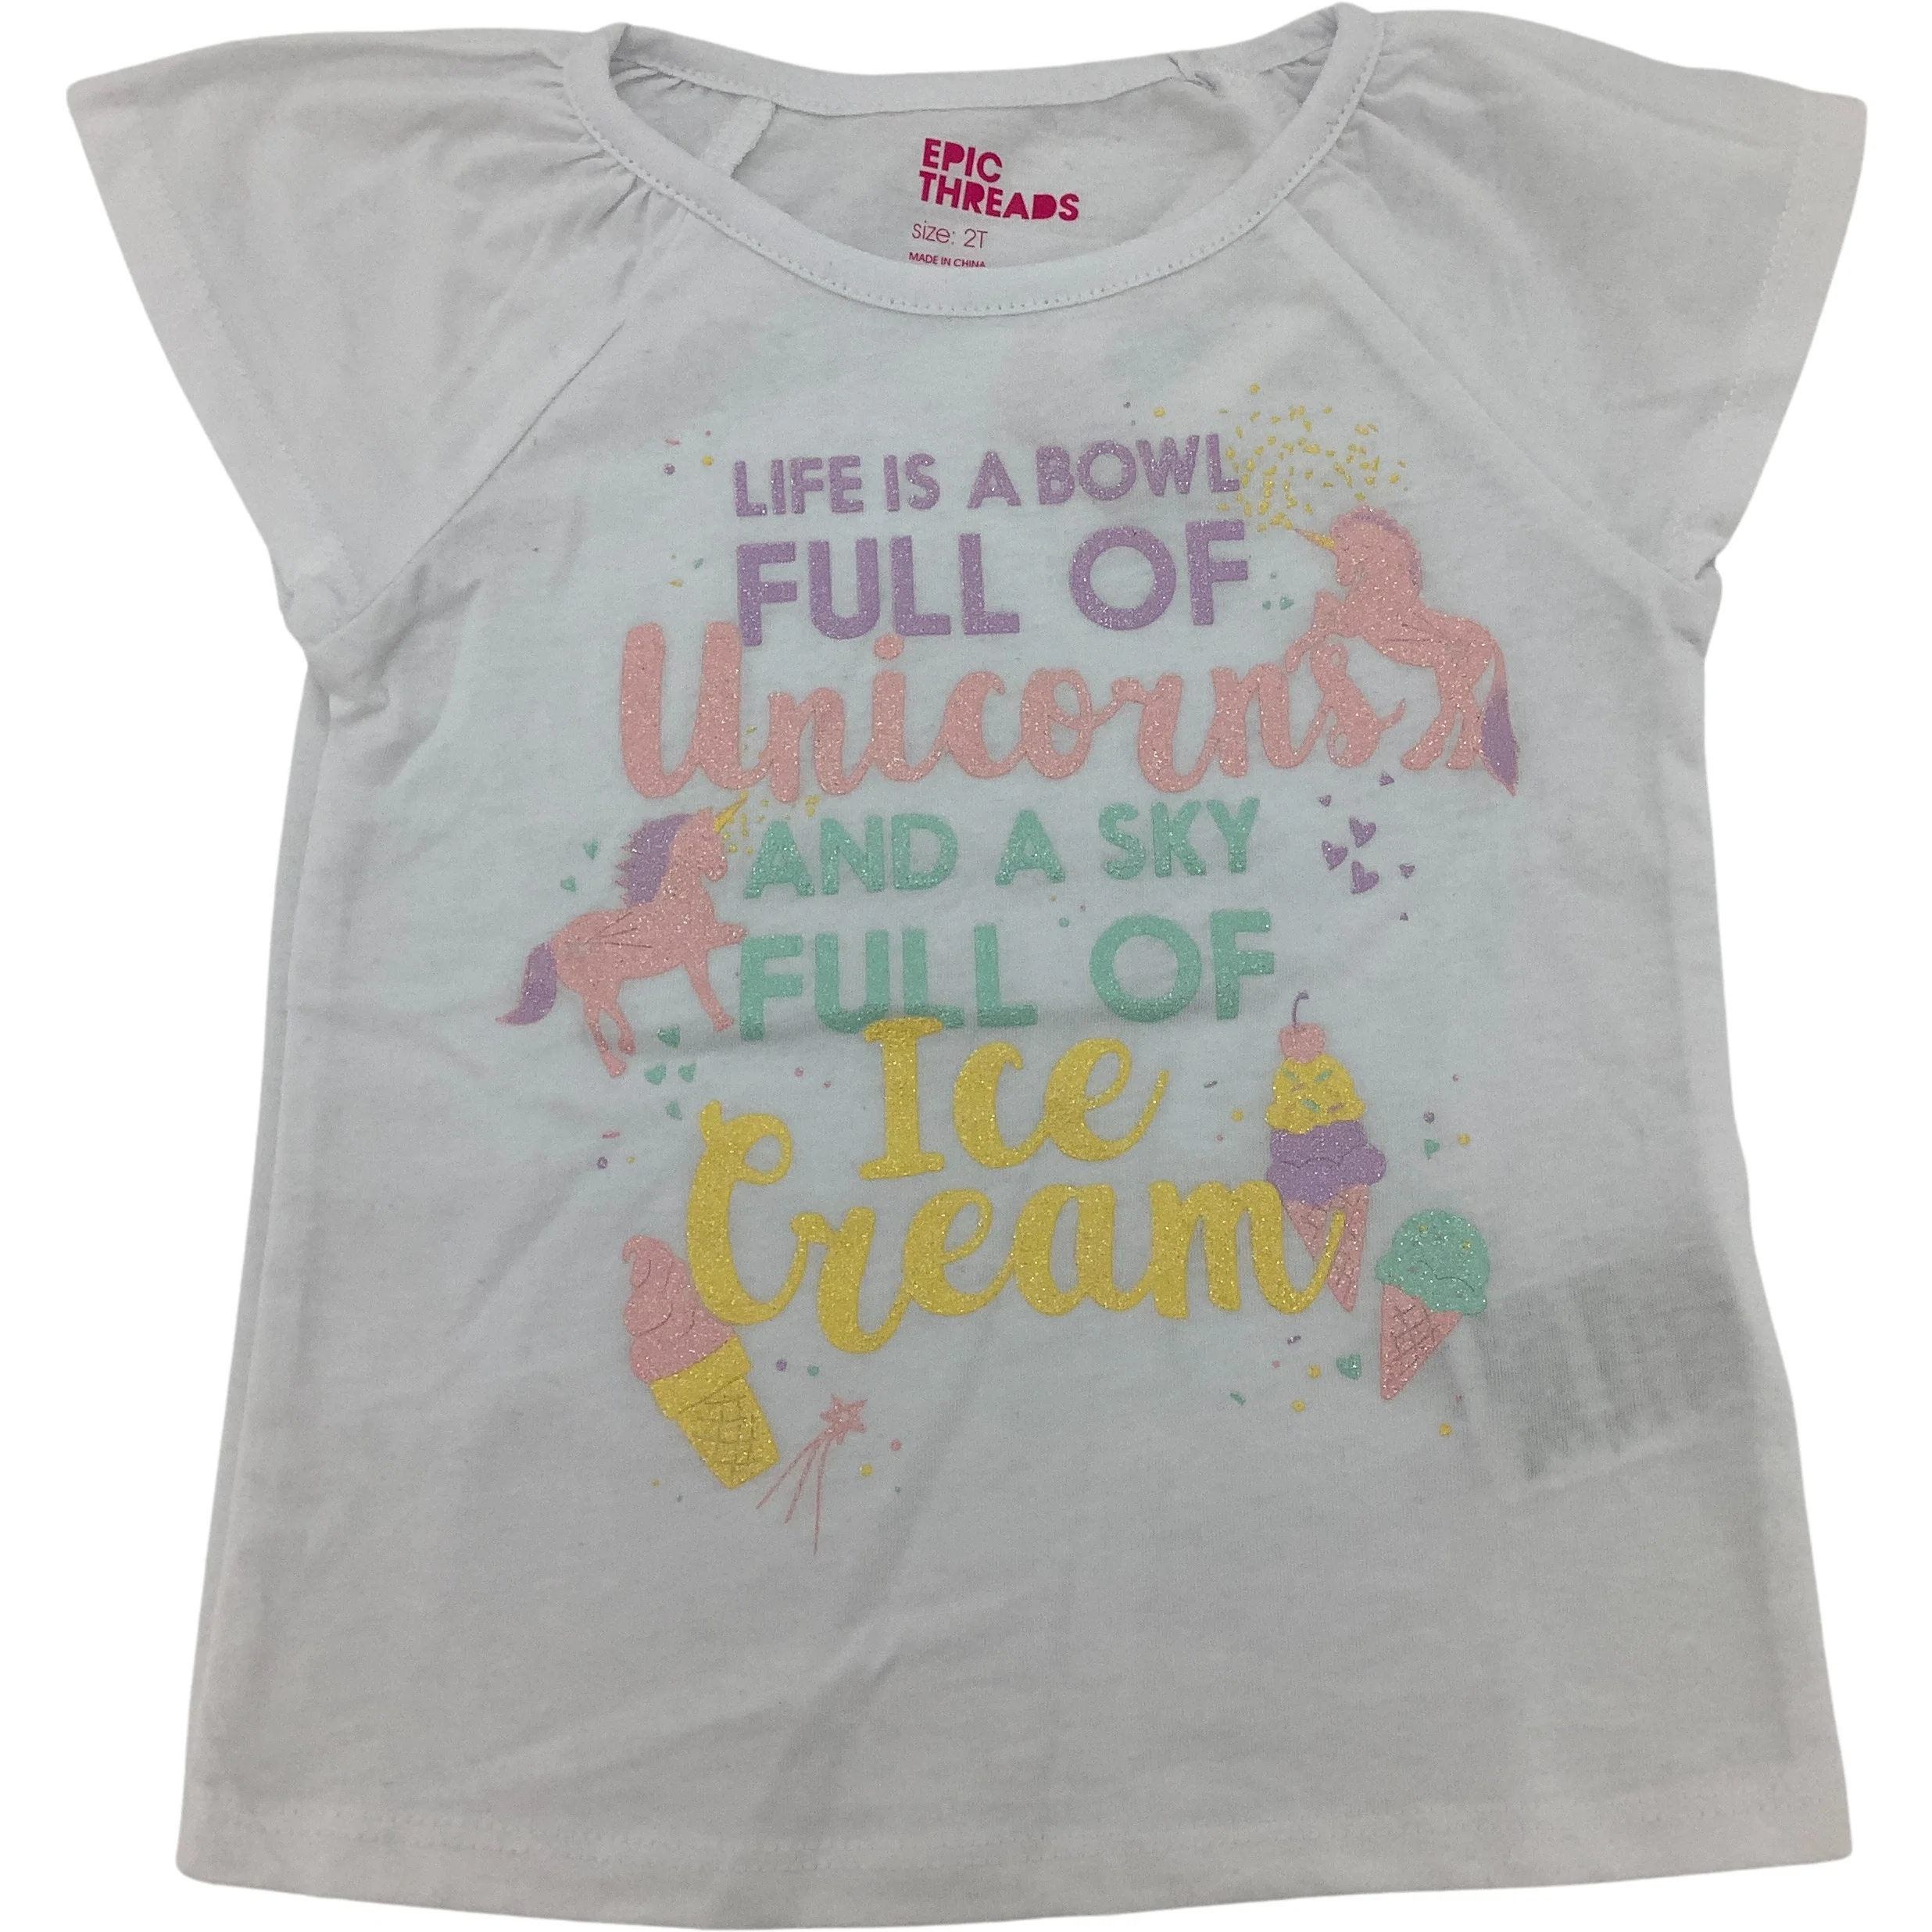 Epic Threads Girl's T-Shirt / White / Unicorn / Size 2T / Kid's Summer Clothes